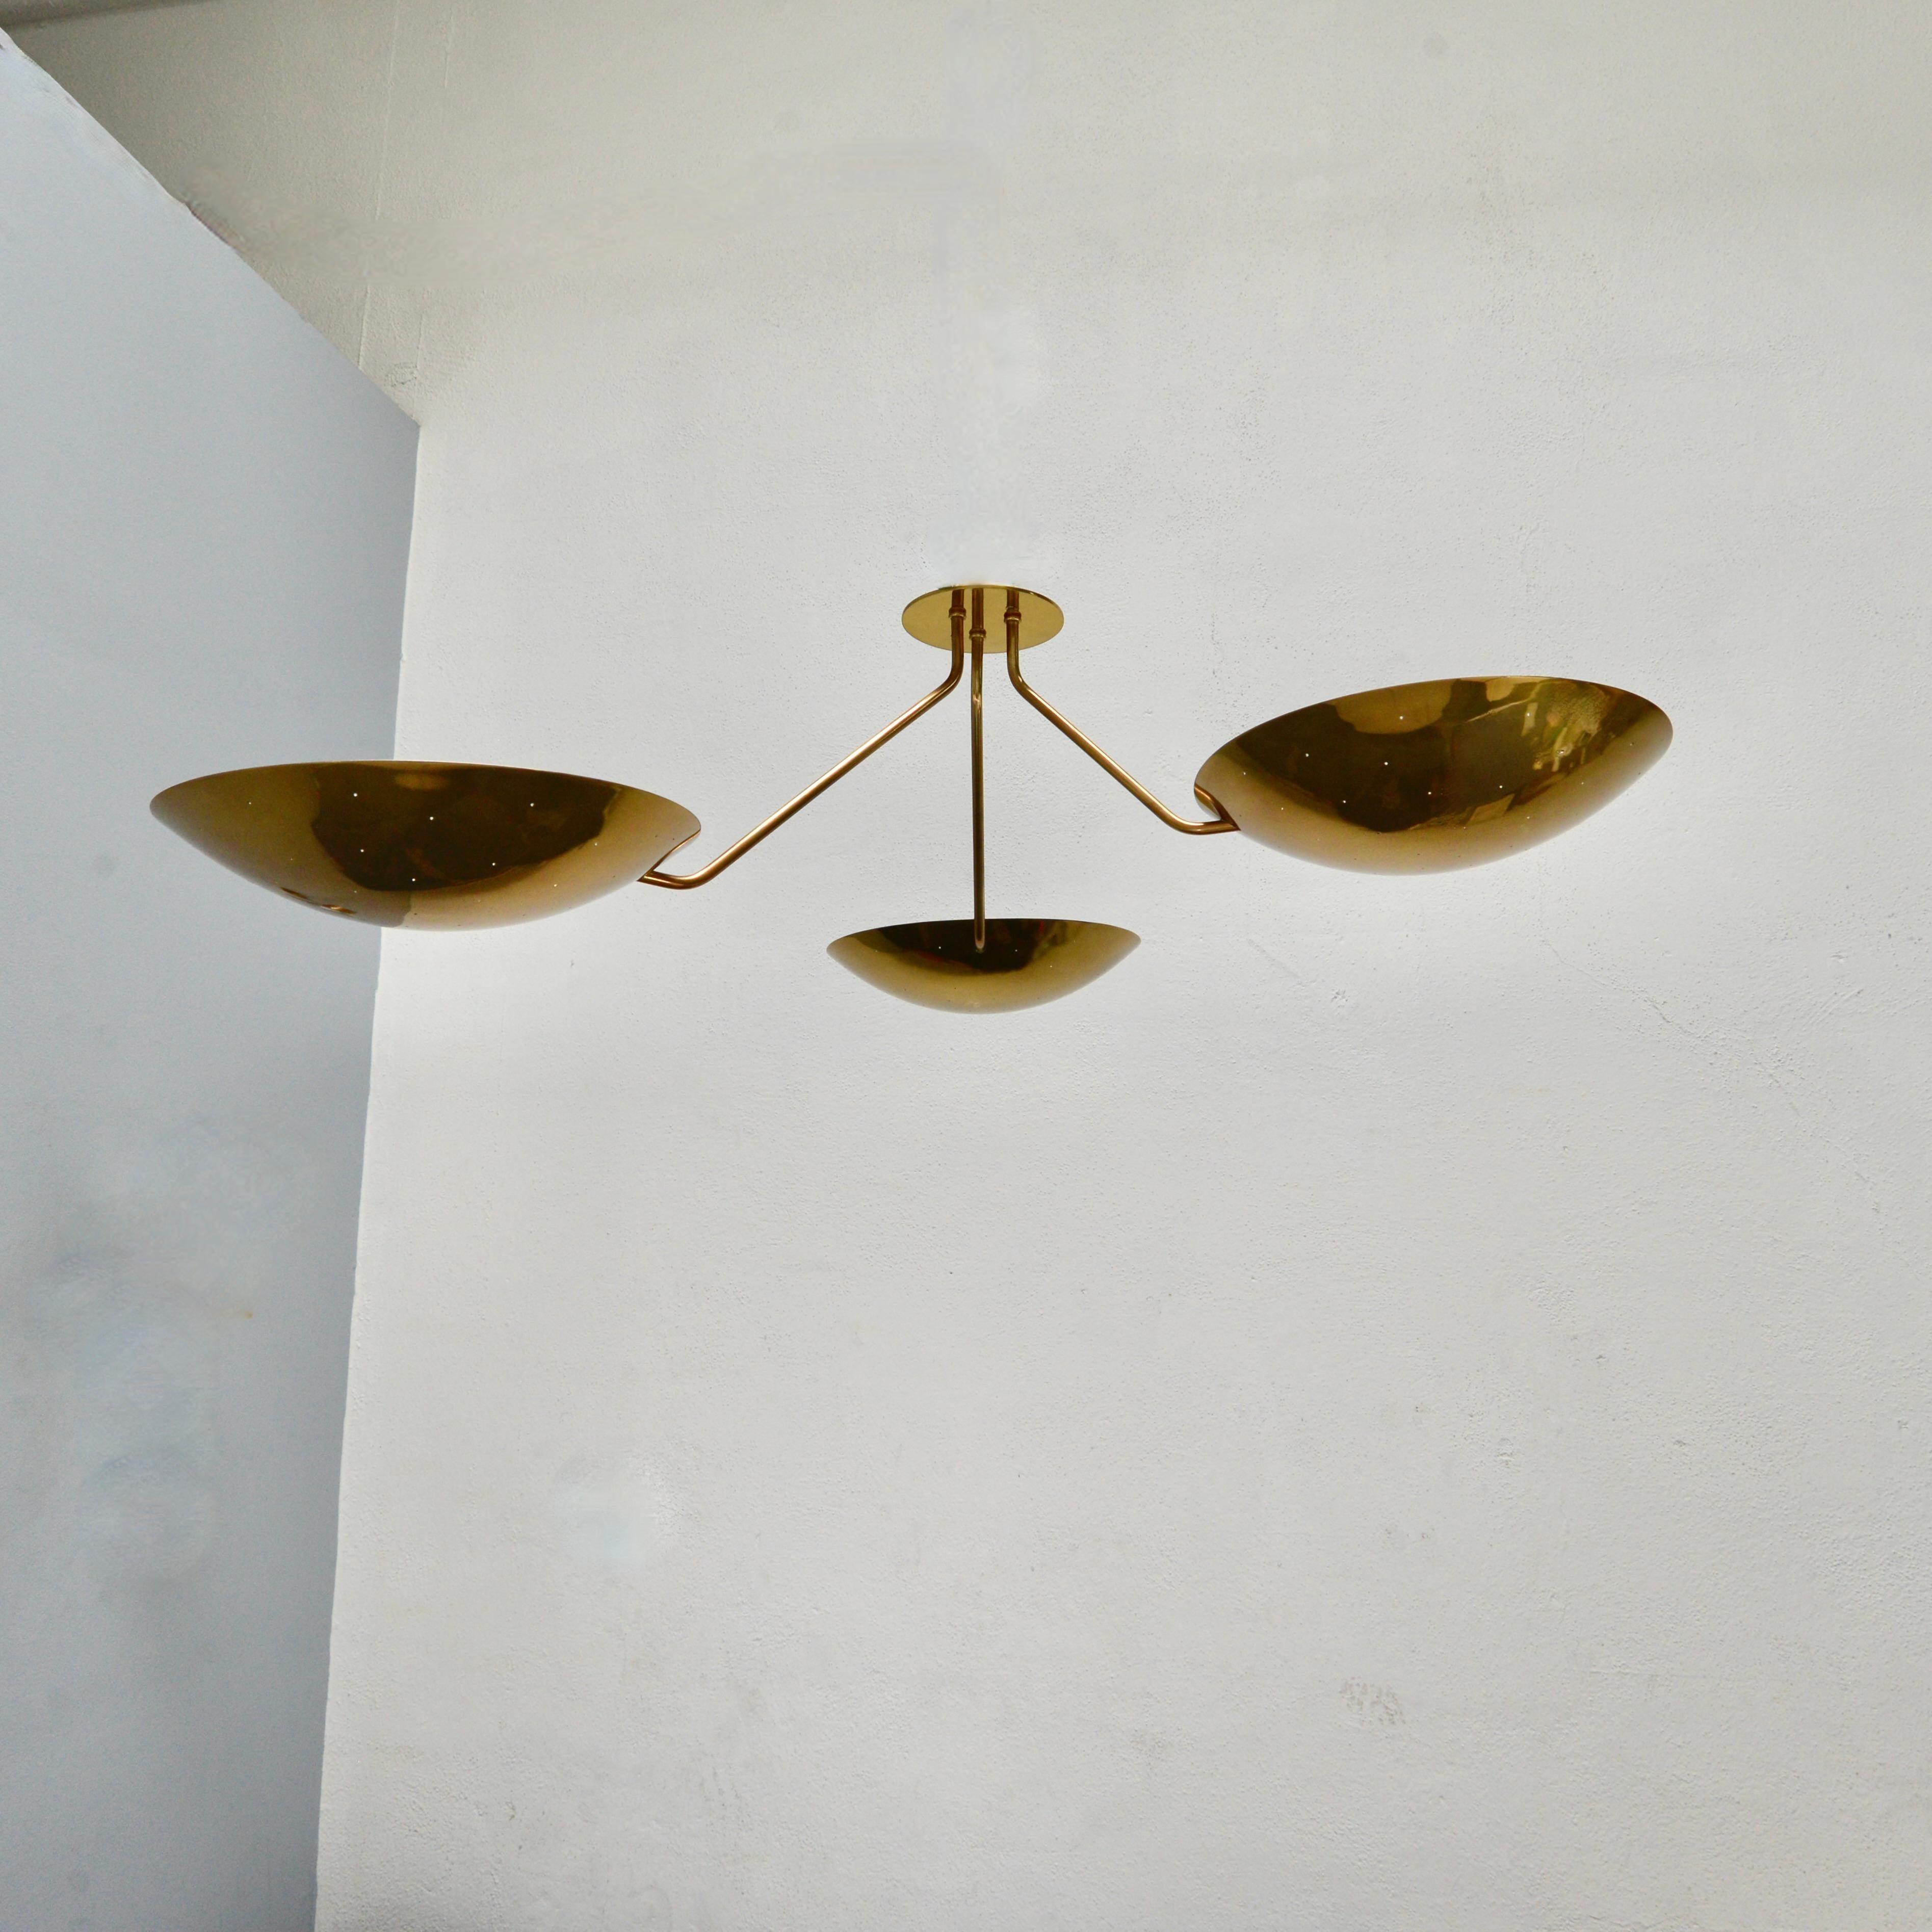 LU 3 Ceiling Fixture is an all perforated brass ceiling fixture inspired by classical mid century Italian design. This stunning fixture has 3 beautifully fabricated perforated brass dish lights joined at a center rod. Made in solid lightly aged